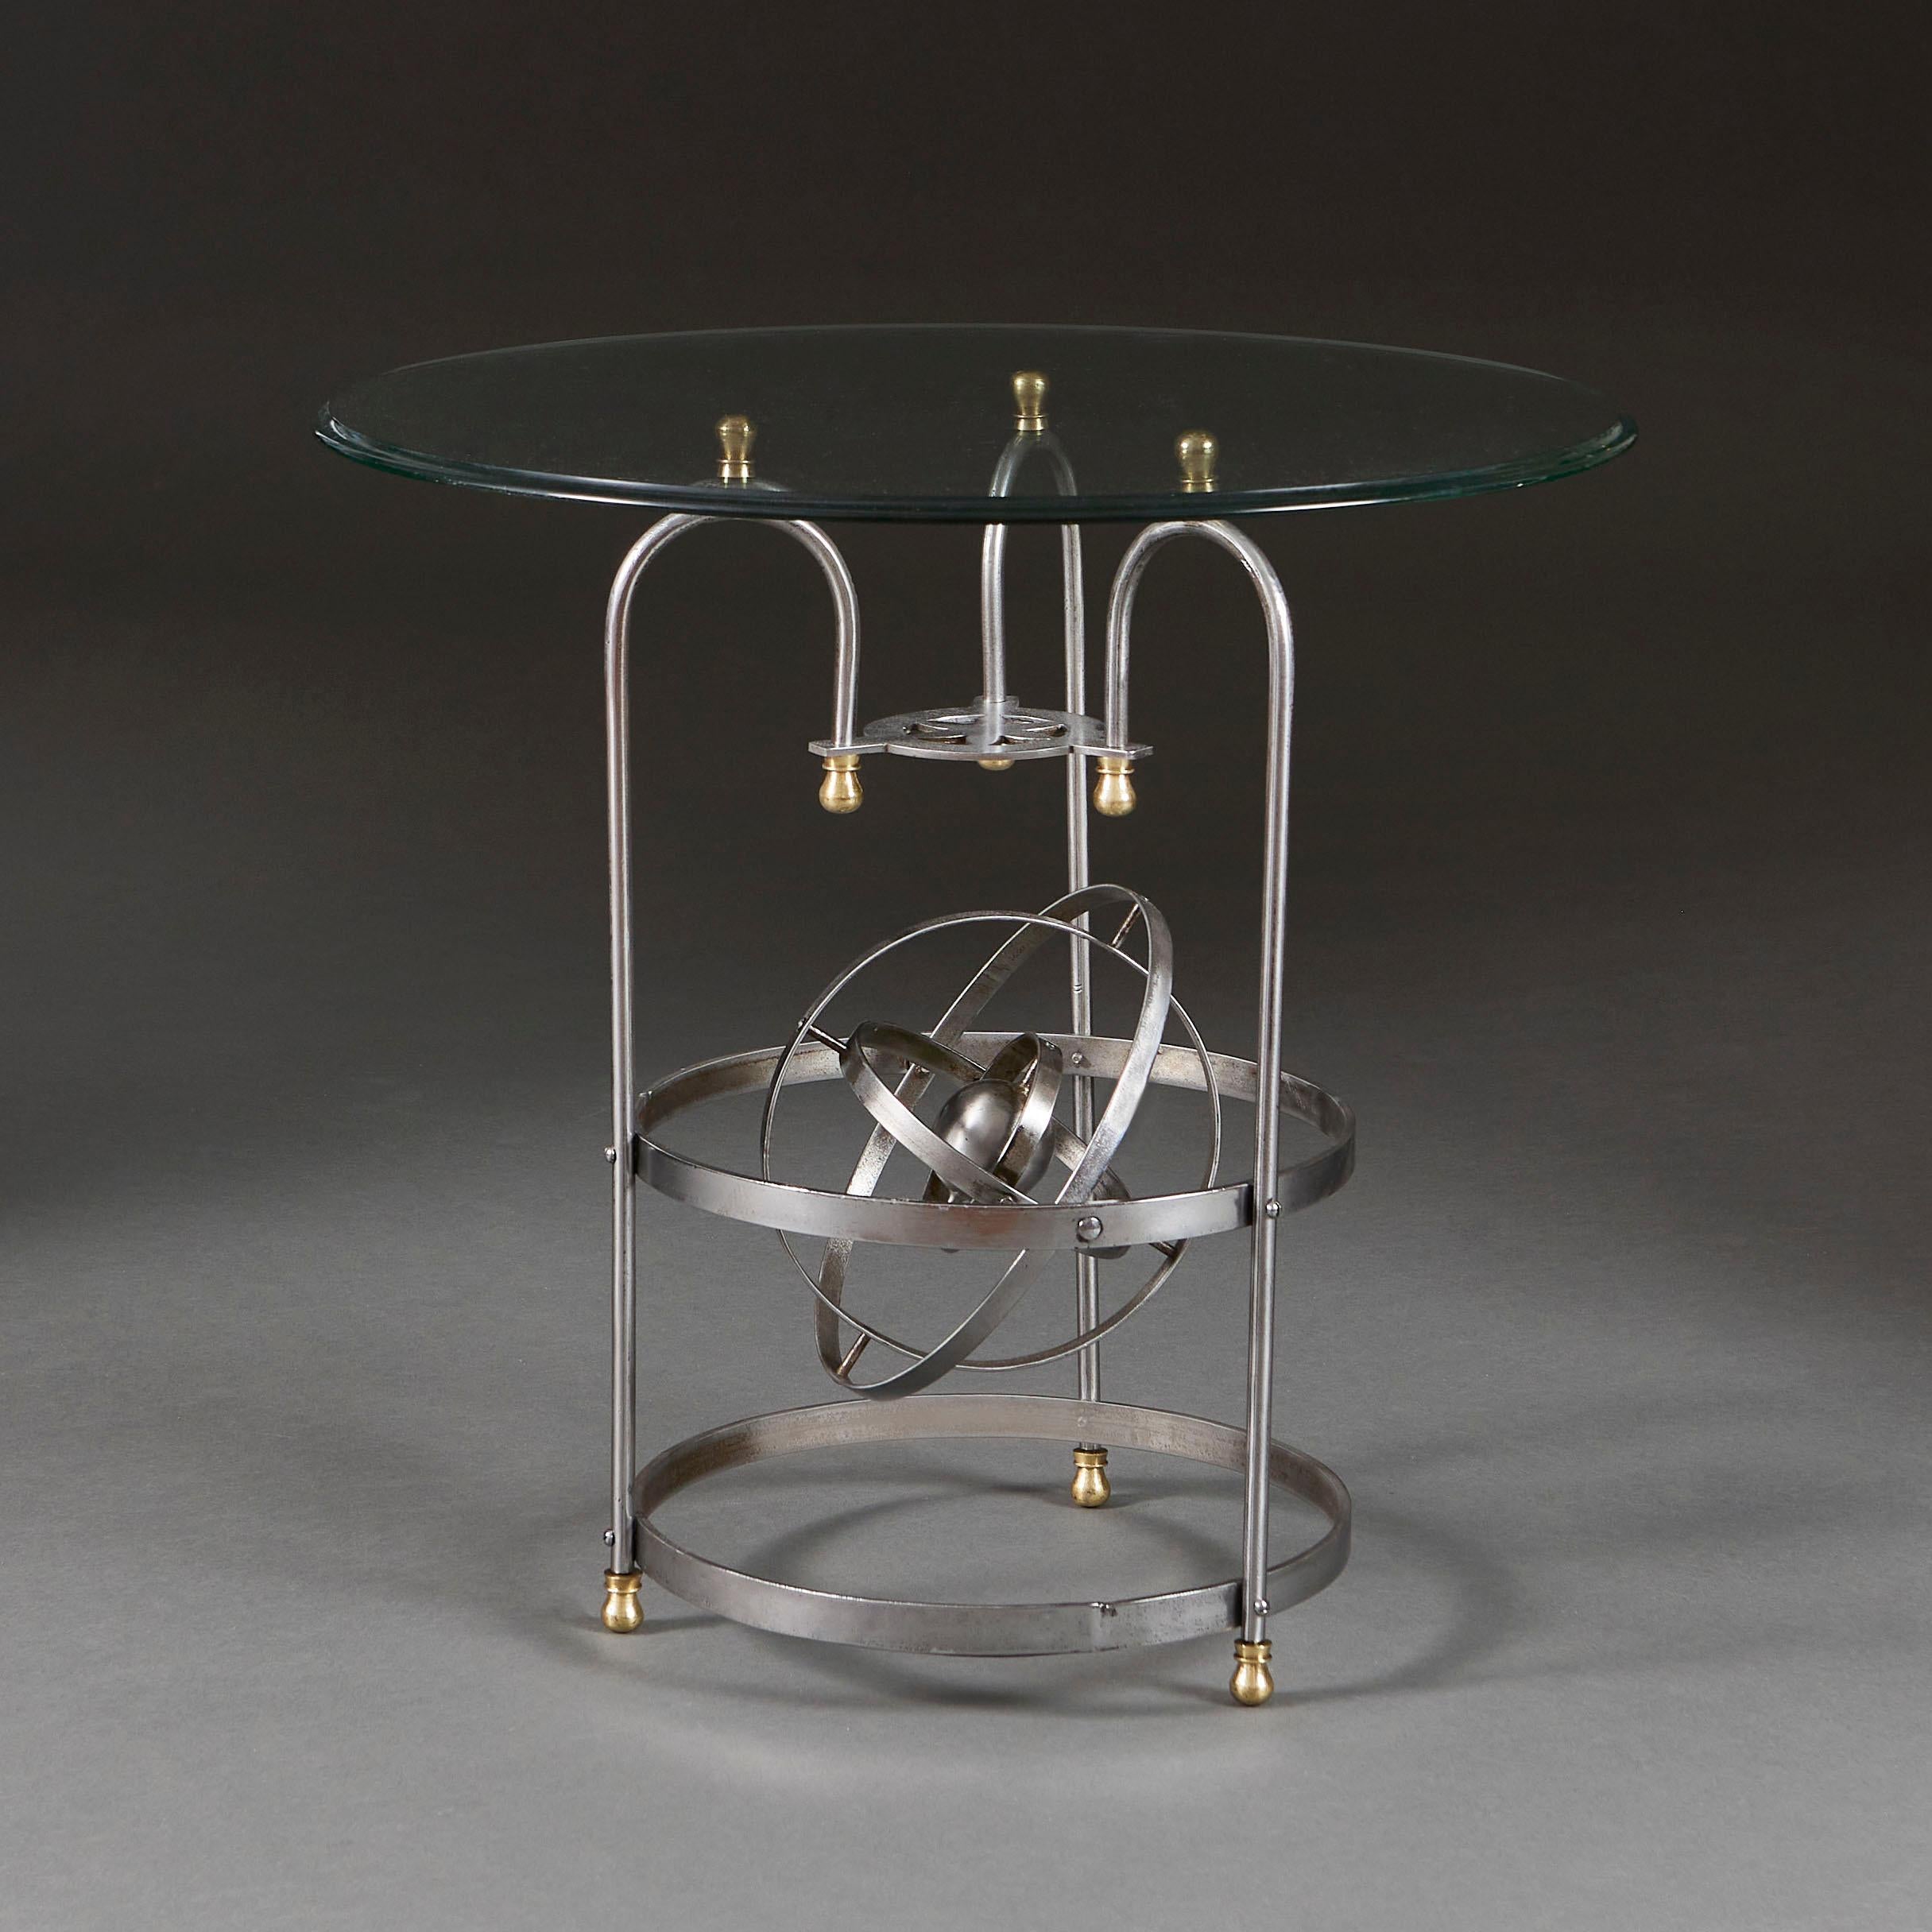 France, circa 1930

An unusual early twentieth century steel and brass table, modelled with an astrolabe of concentric steel circles within a rotating globe, supported on three brass feet.

Height         53.00cm
Diameter    55.00cm